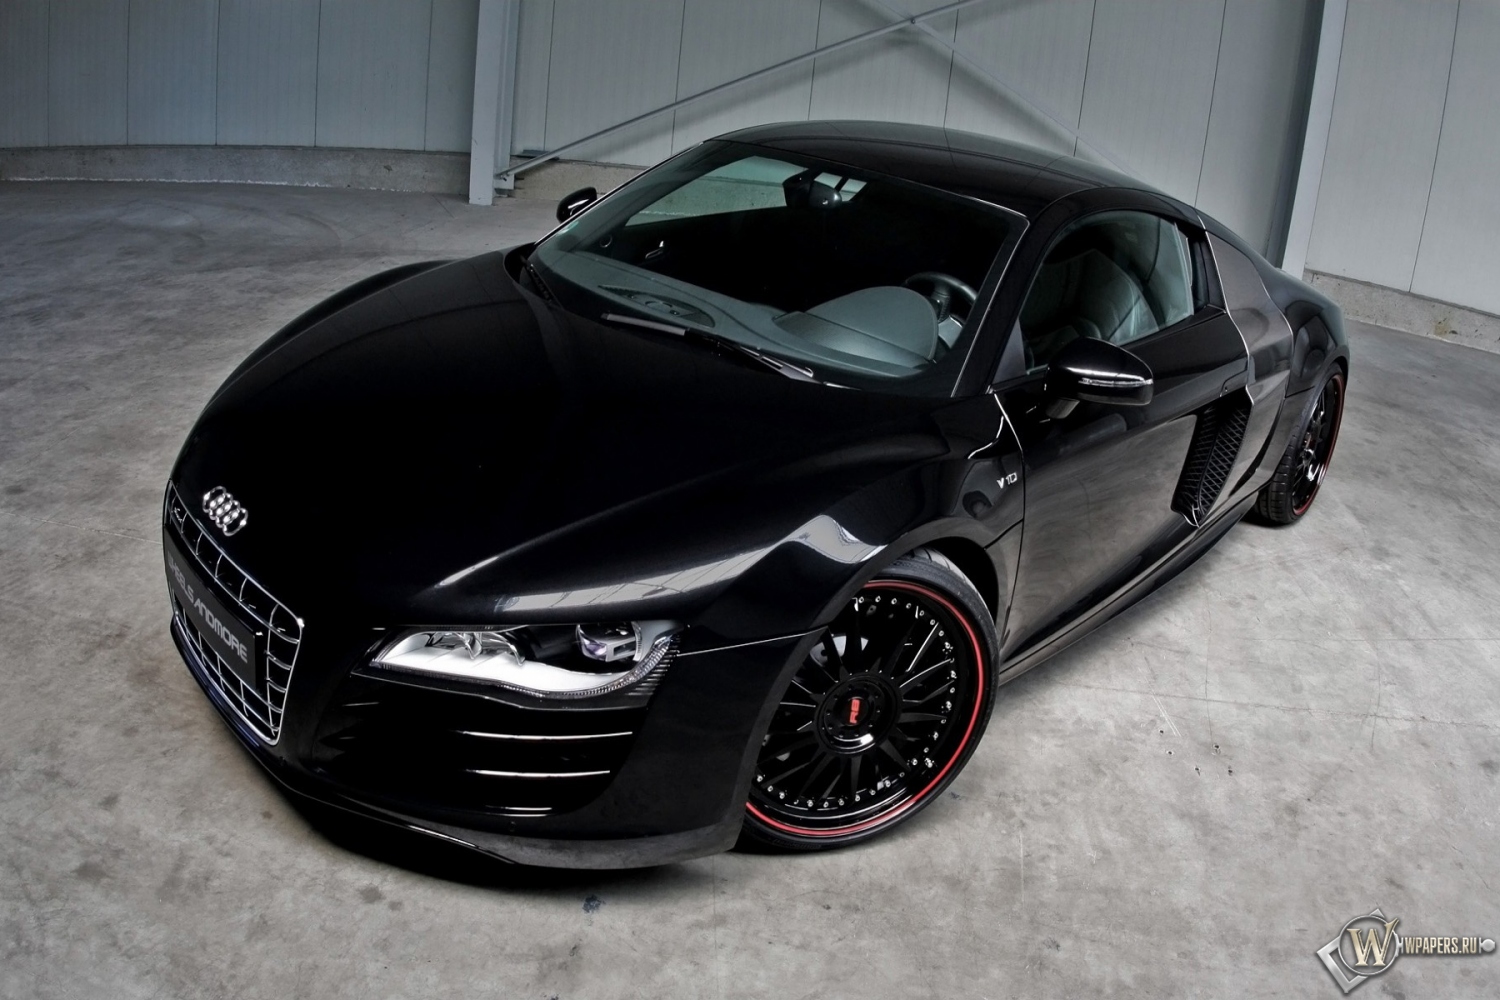 2011 Wheelsandmore Audi R8 V10 .6 - Front Angle Top 1500x1000